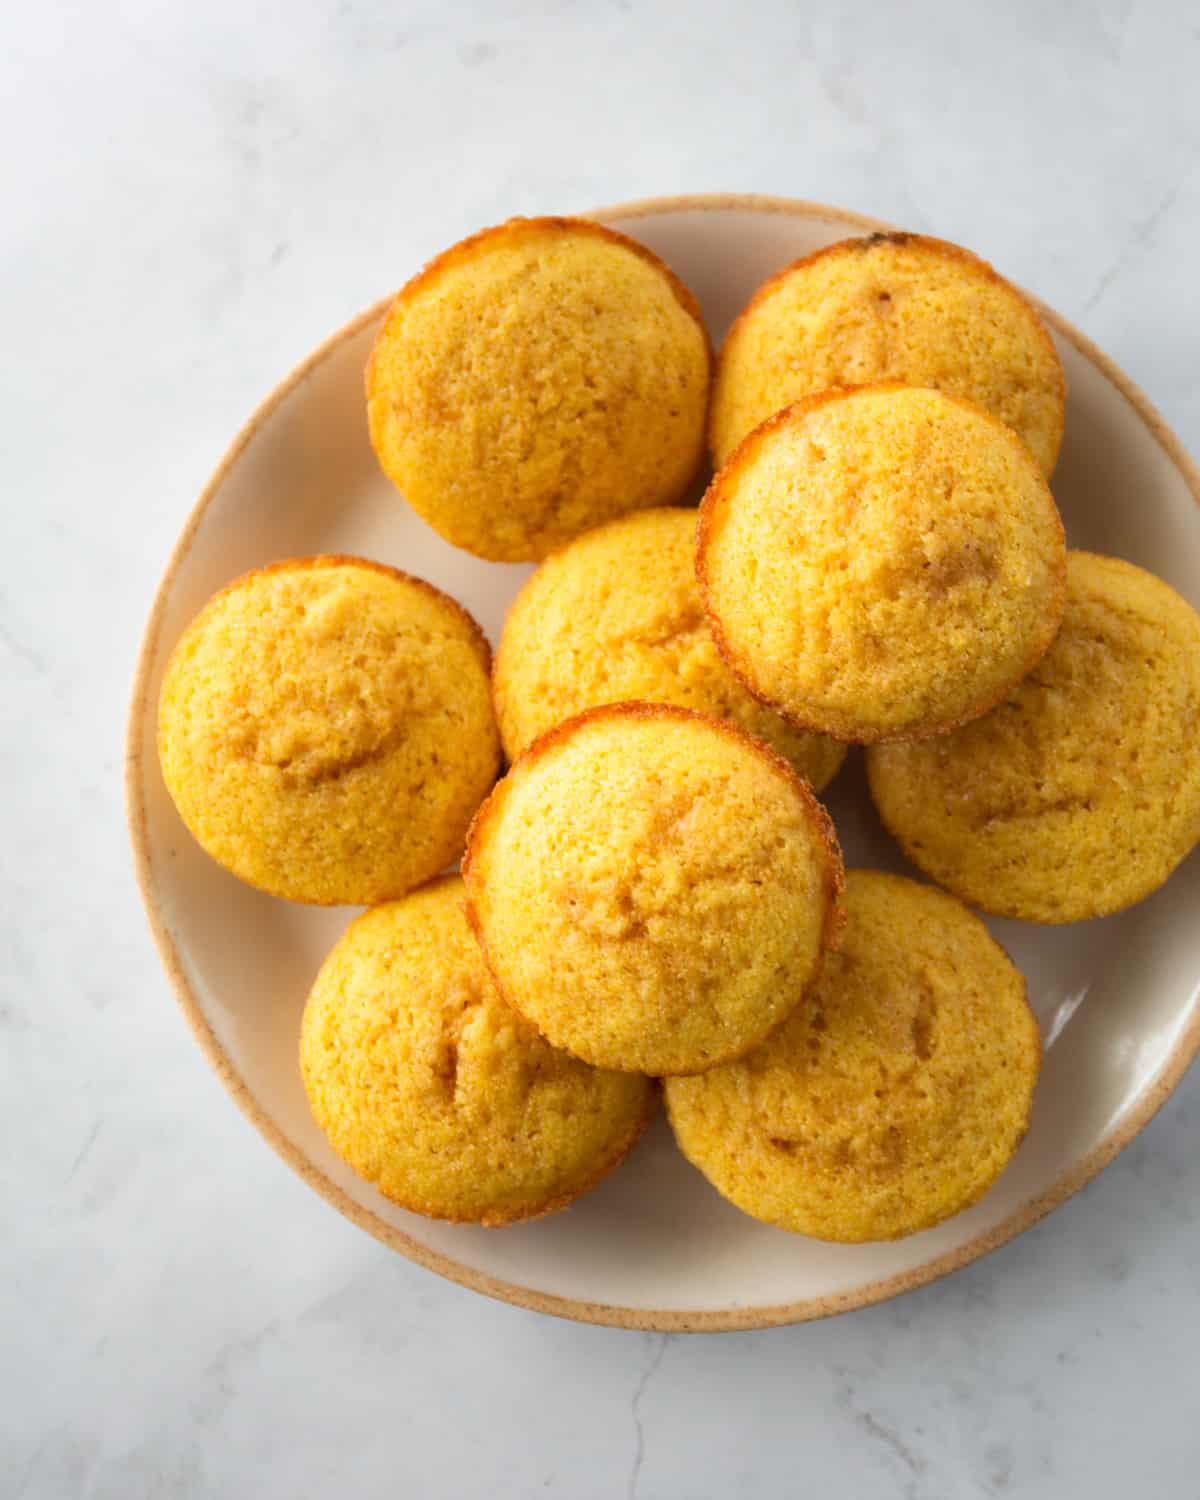 cornmeal cakes on a white plate